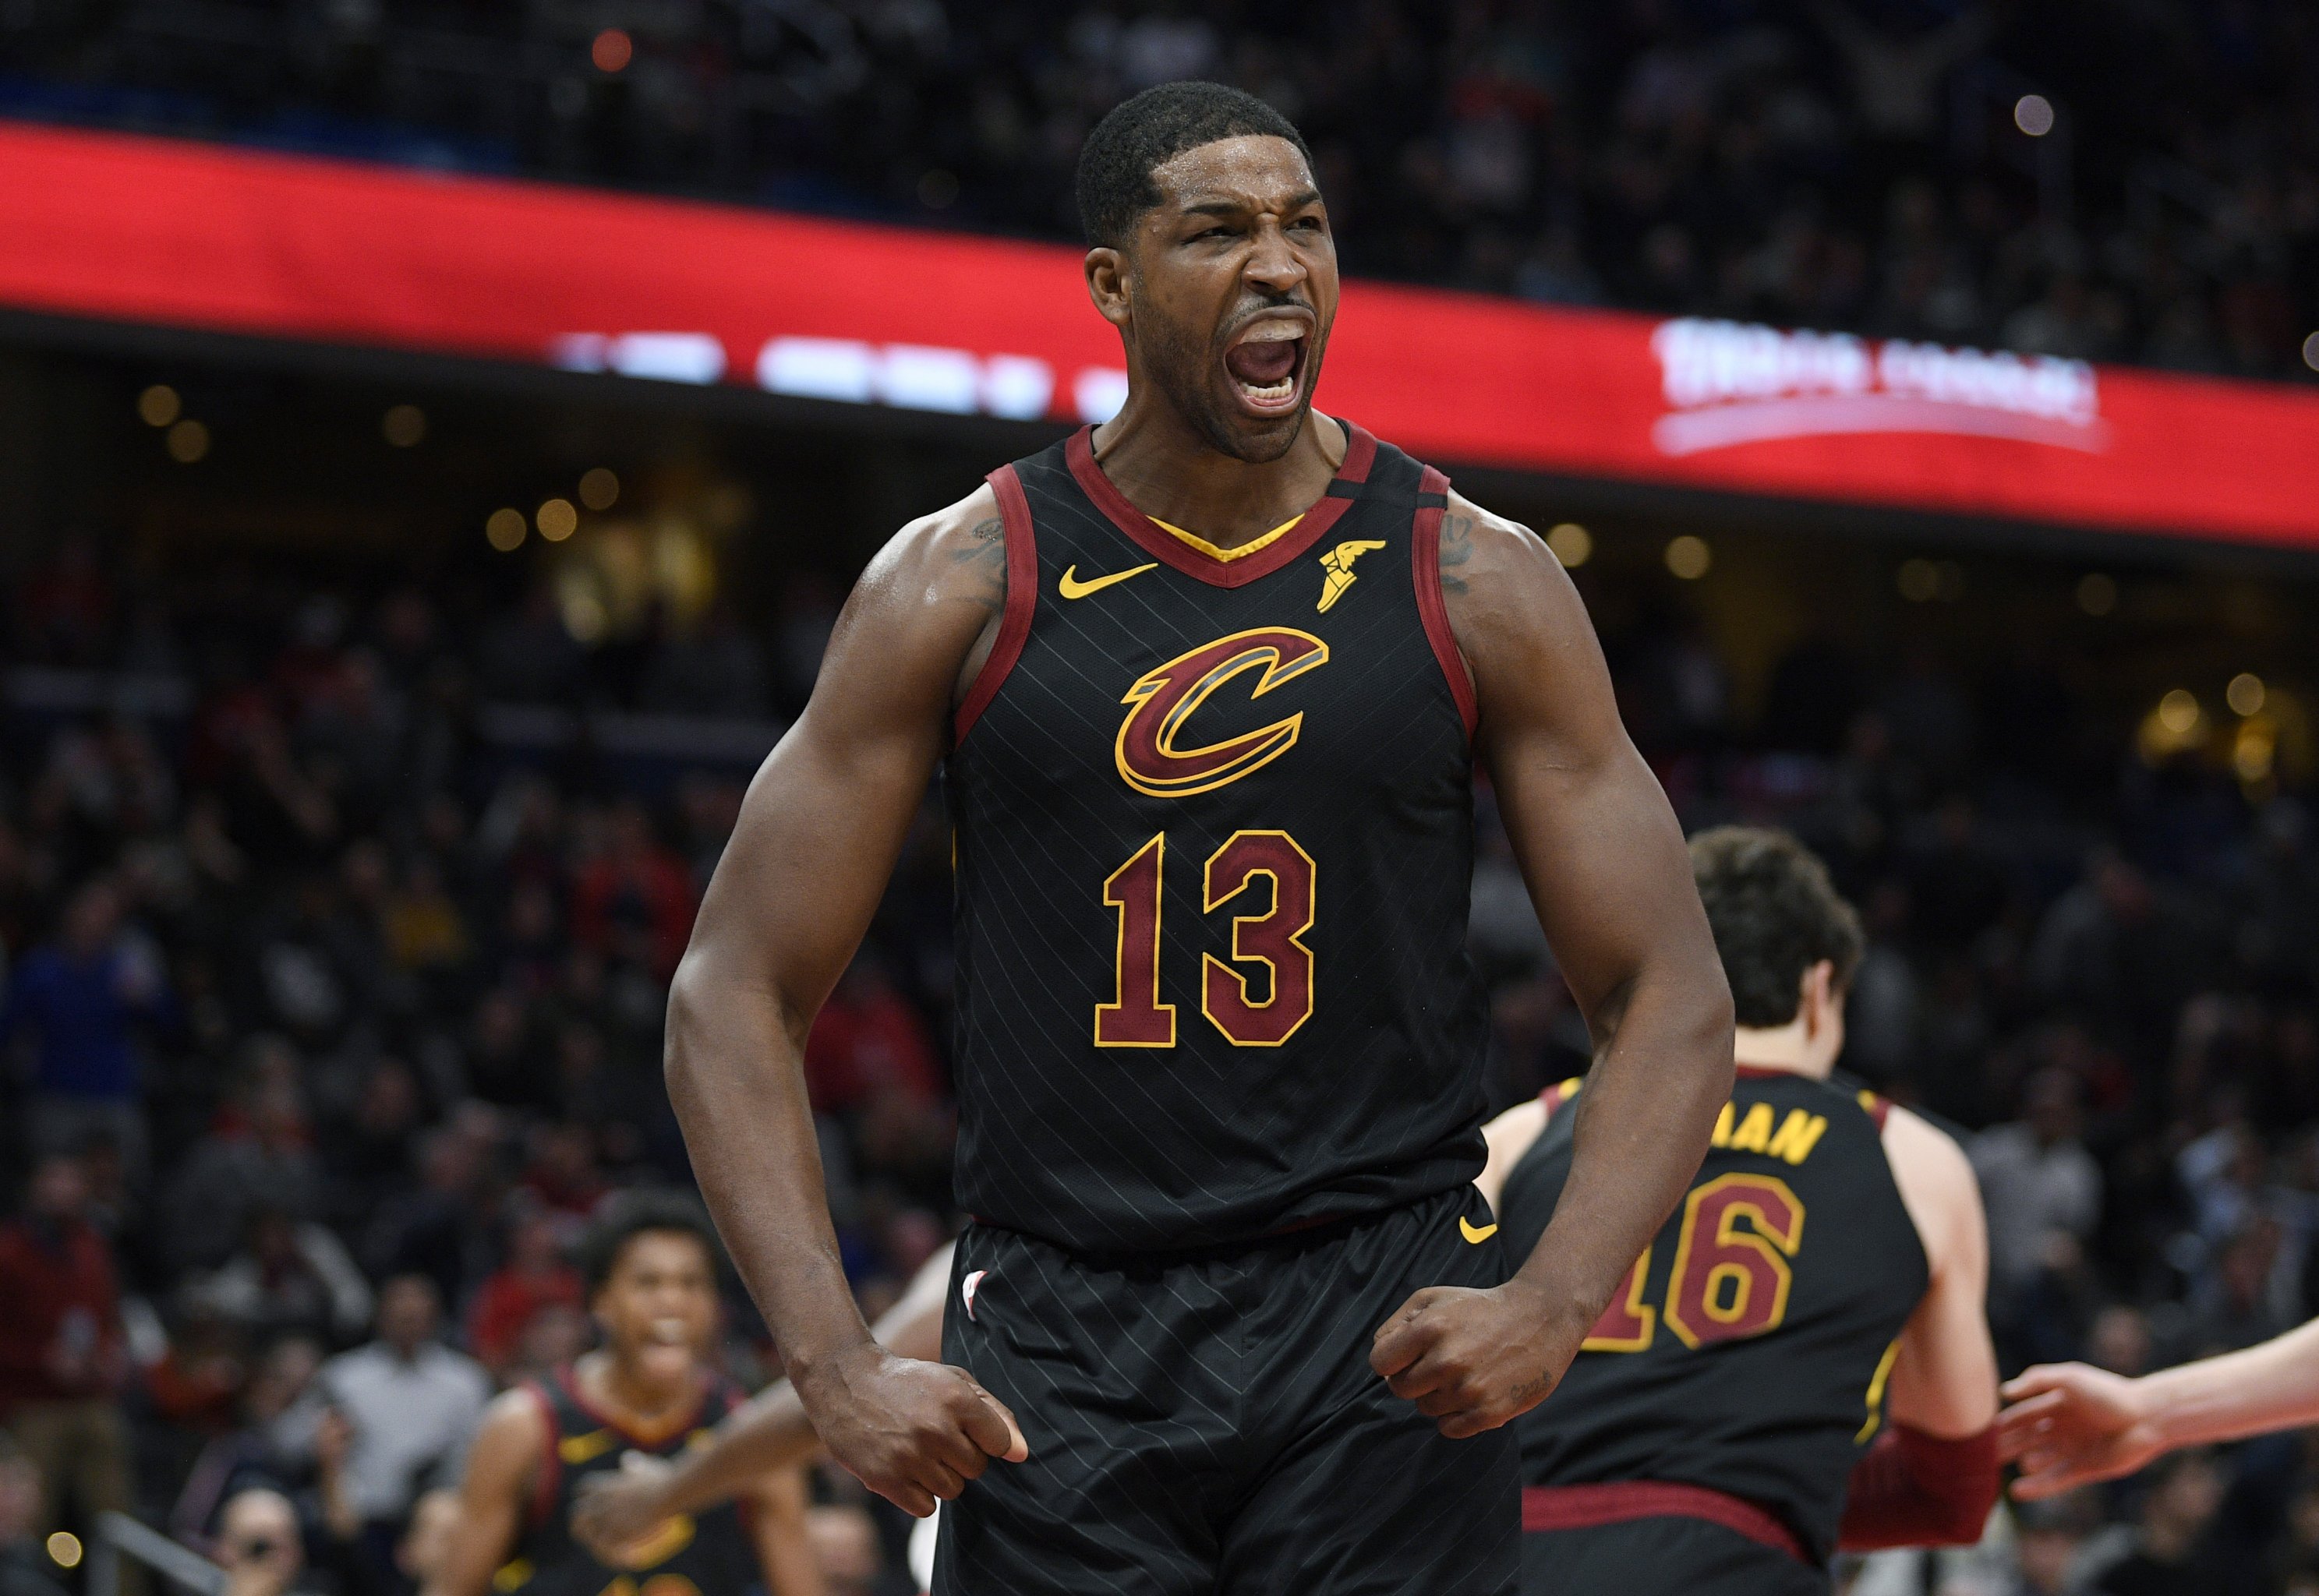 That time the Cavaliers invited 17-year-old LeBron James for an illegal  workout and got fined - Basketball Network - Your daily dose of basketball